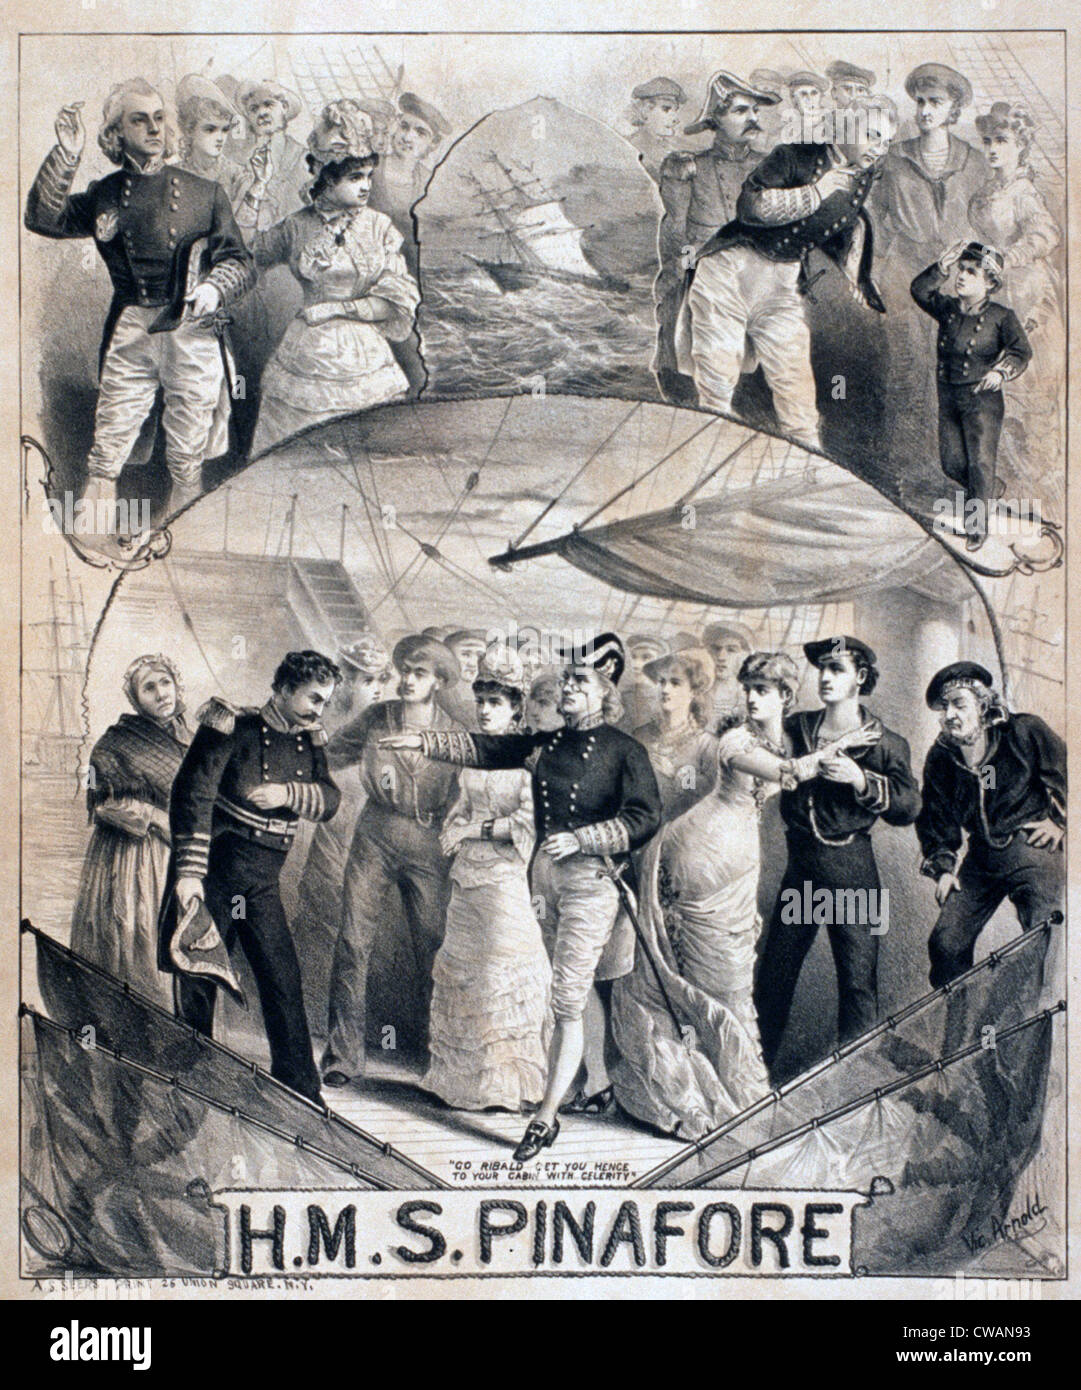 Gilbert & Sullivan's comic operetta, H.M.S. PINAFORE about a romance between the daughter of a ship's captain who loves a Stock Photo